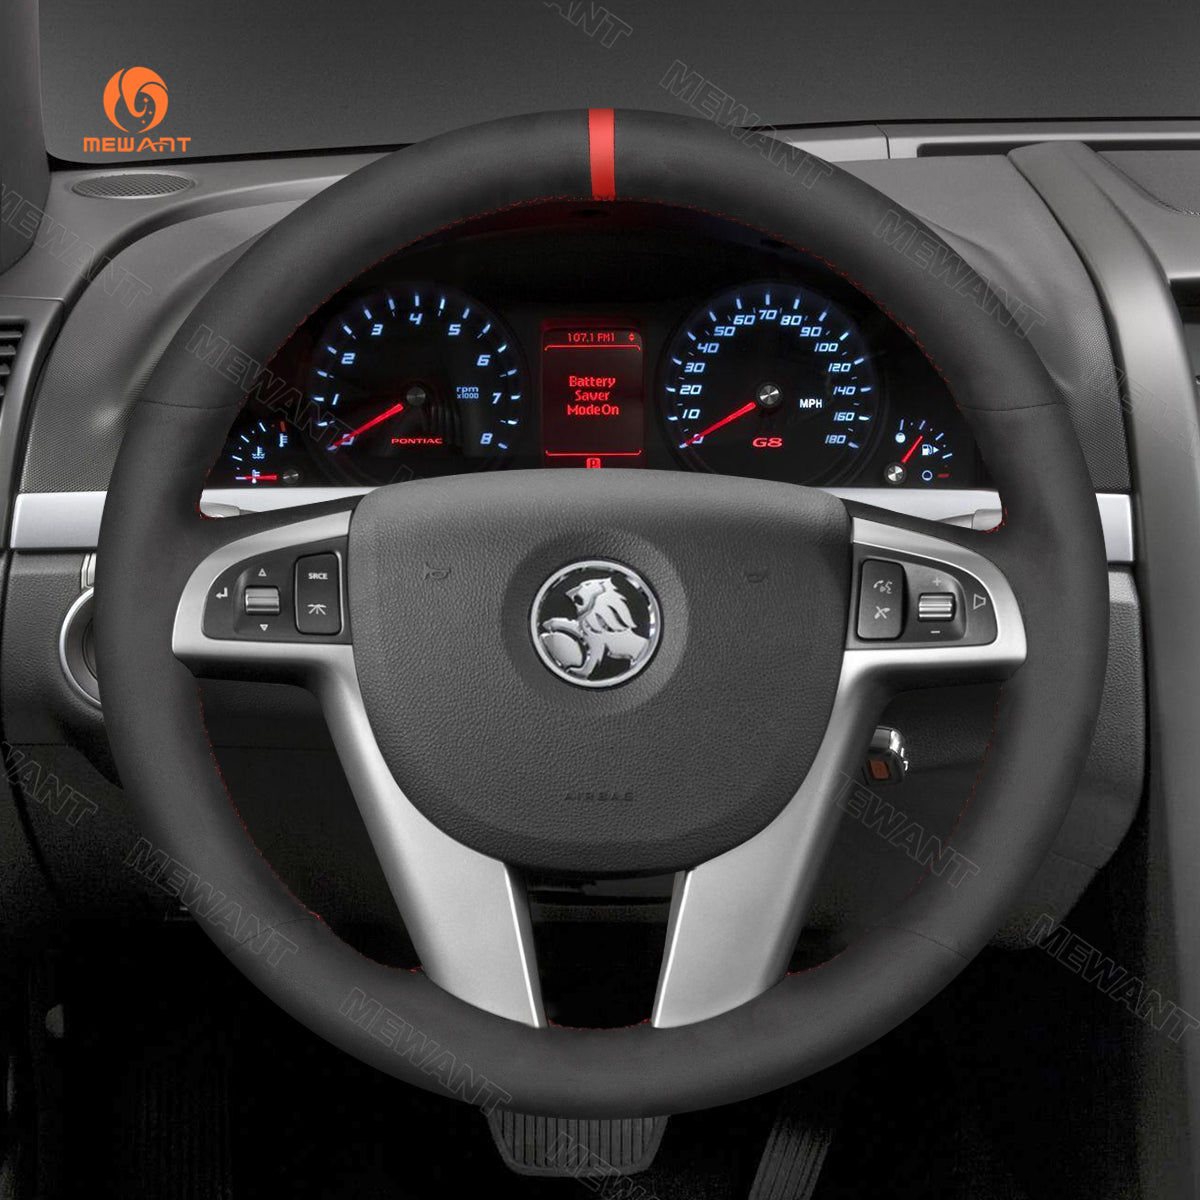 MEWANT Hand Stitch Car Steering Wheel Cover for Holden Commodore (VE) Ute Calais Berlina Caprice Statesman